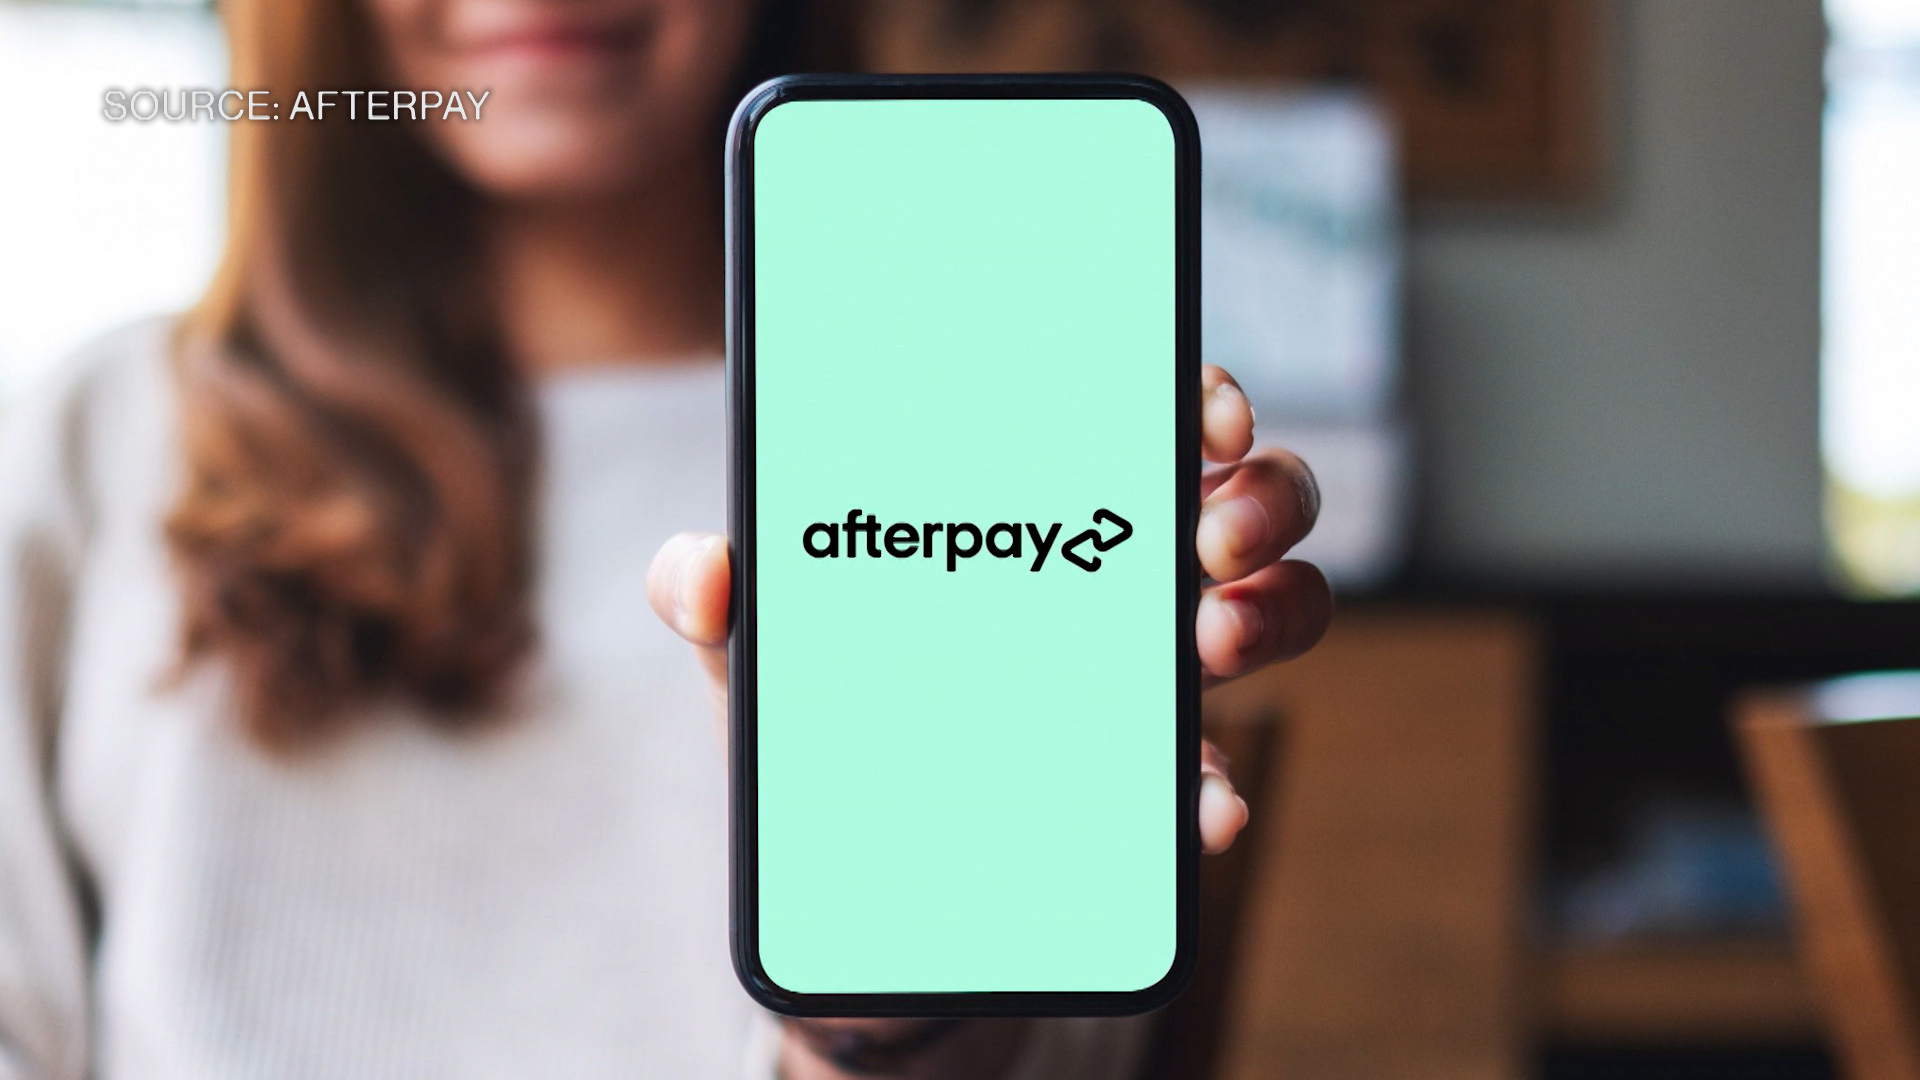 Banks square up to Afterpay and Apple in payments fight